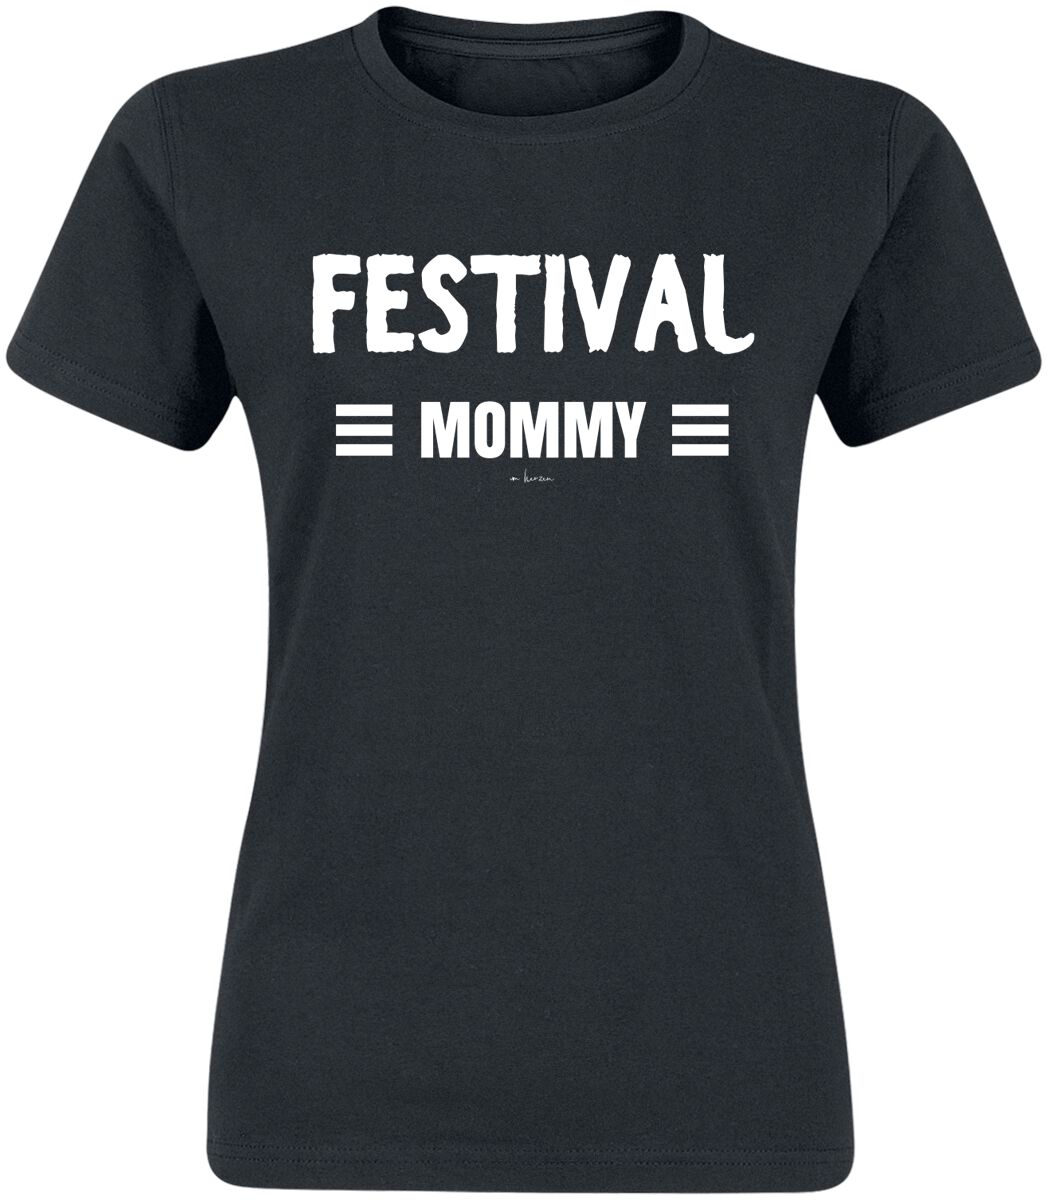 Alcohol & Party Festival Mommy T-Shirt black